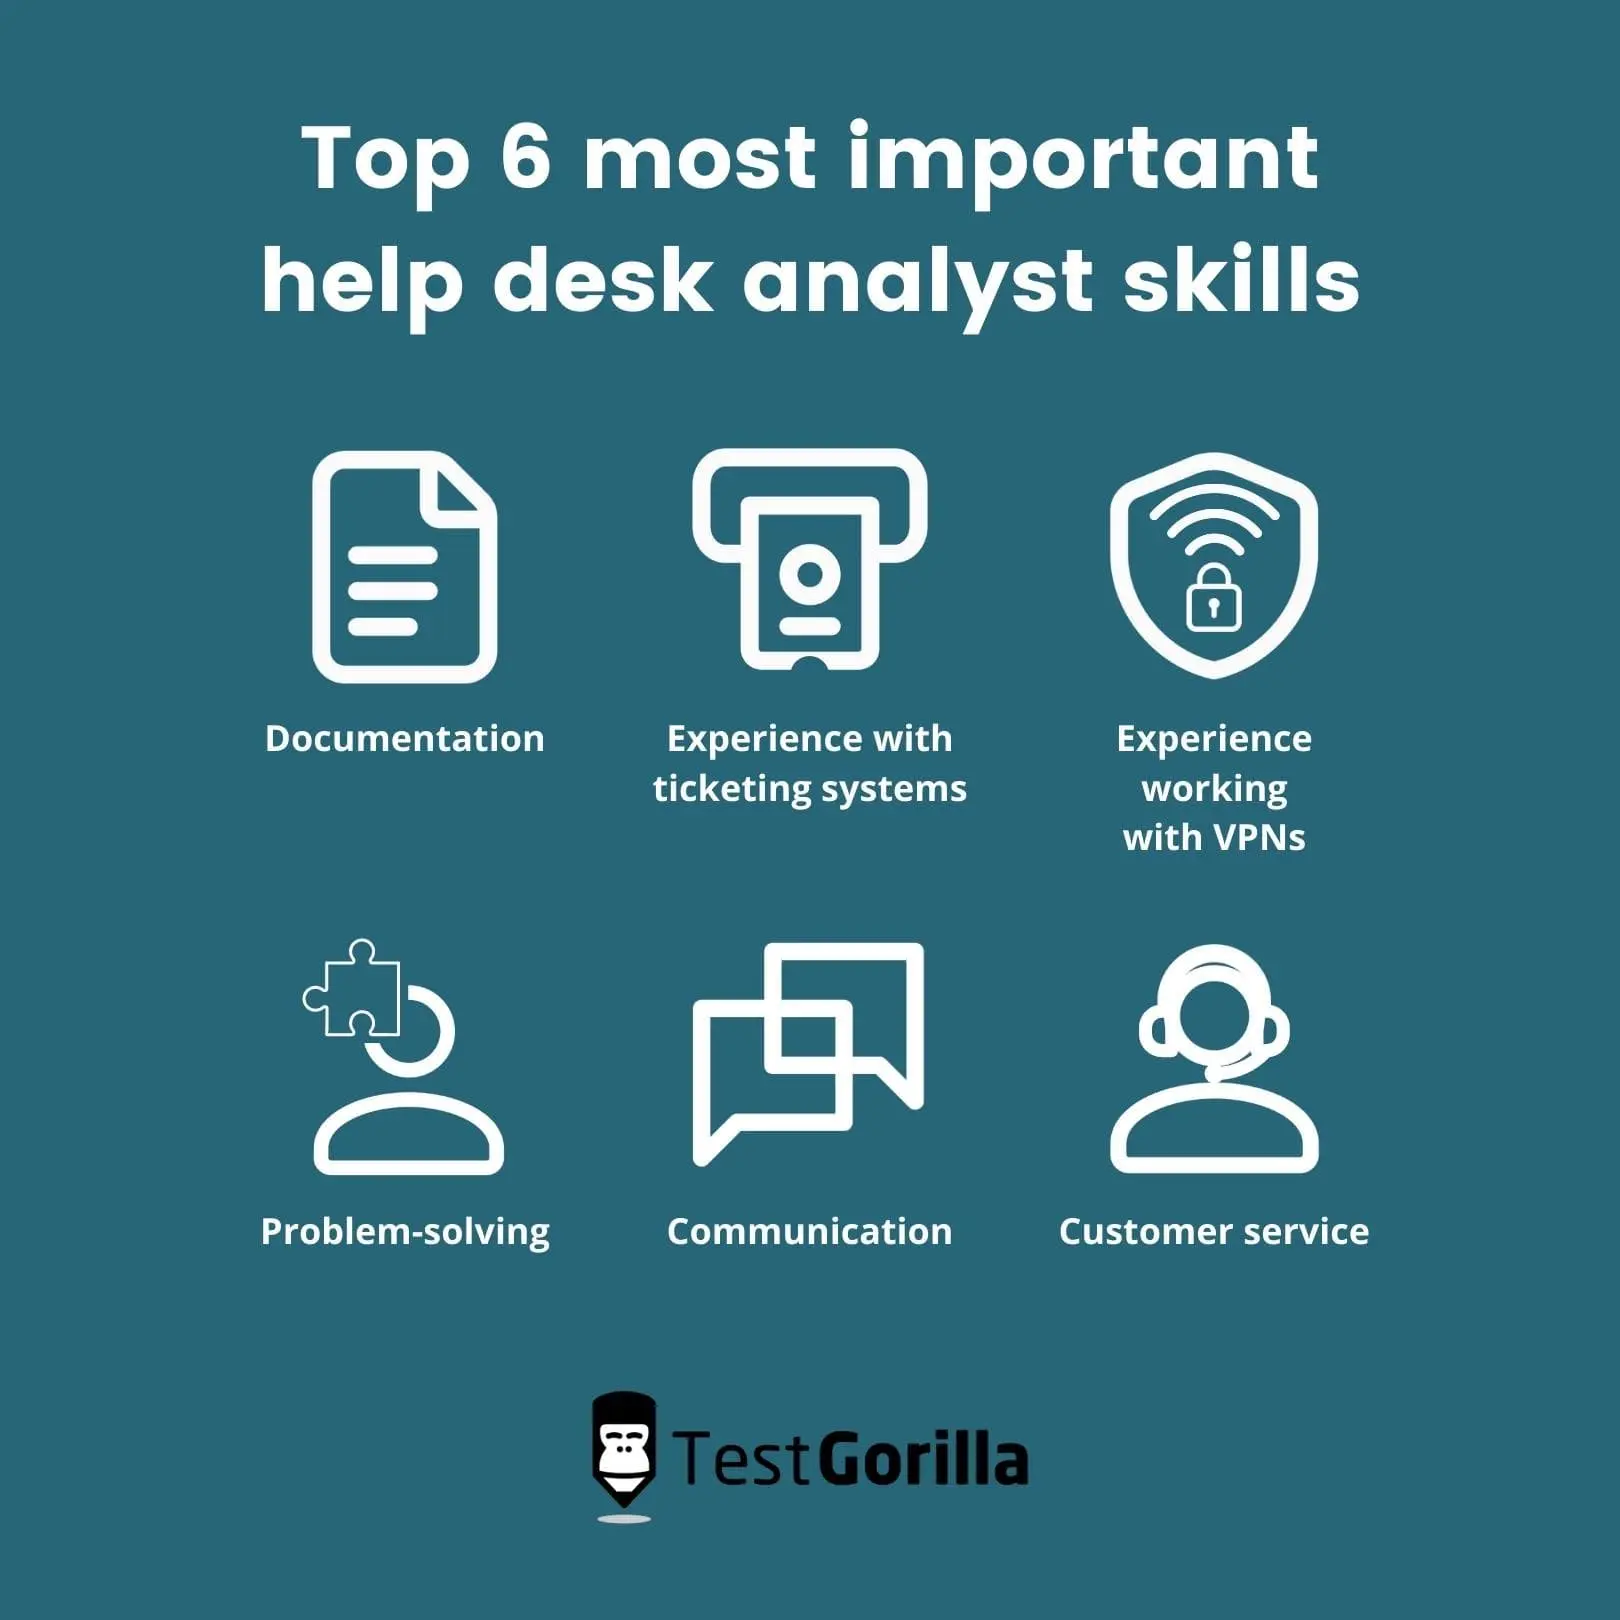 Top 6 most important help desk analyst skills